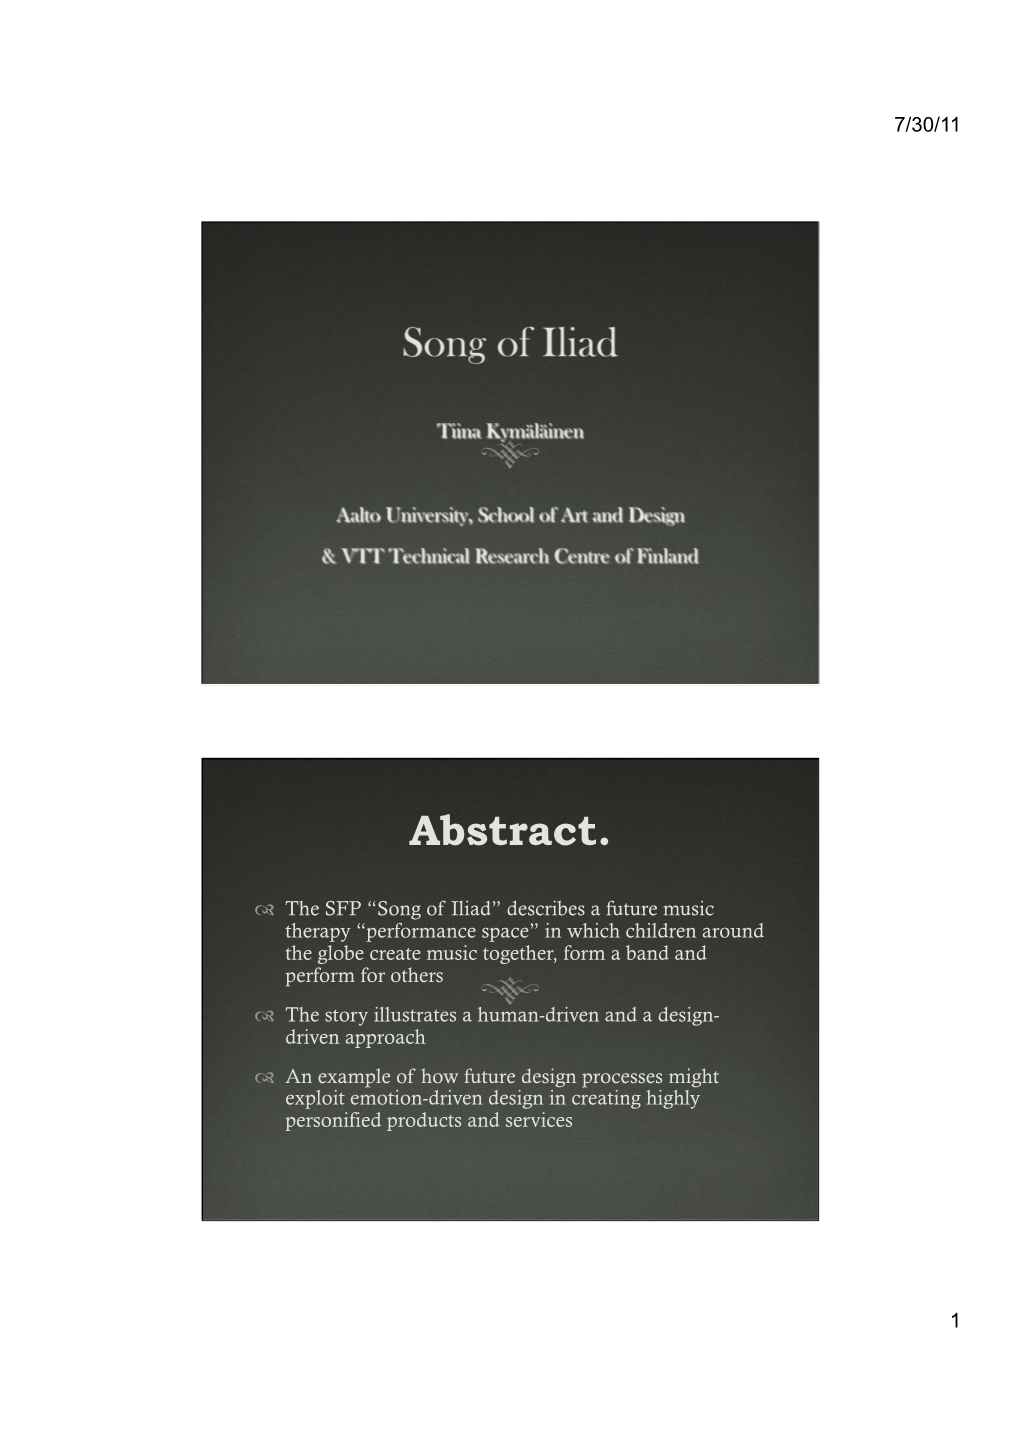 Song of Iliad Abstract